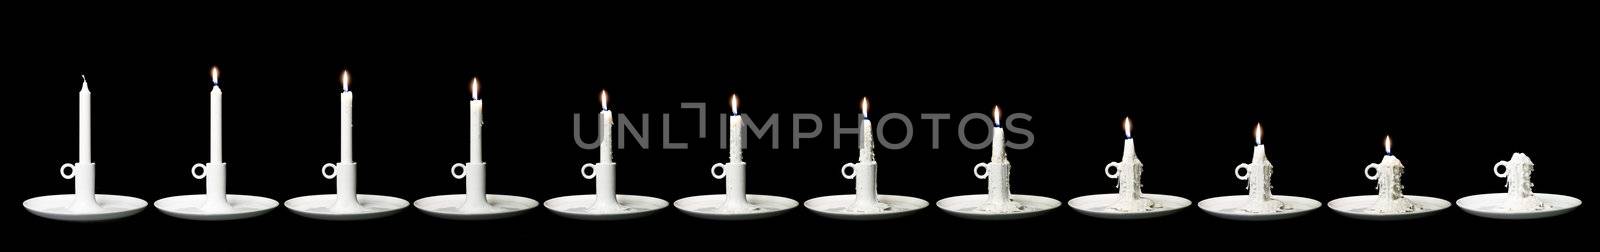 Candle burning down in 12 steps against a black background